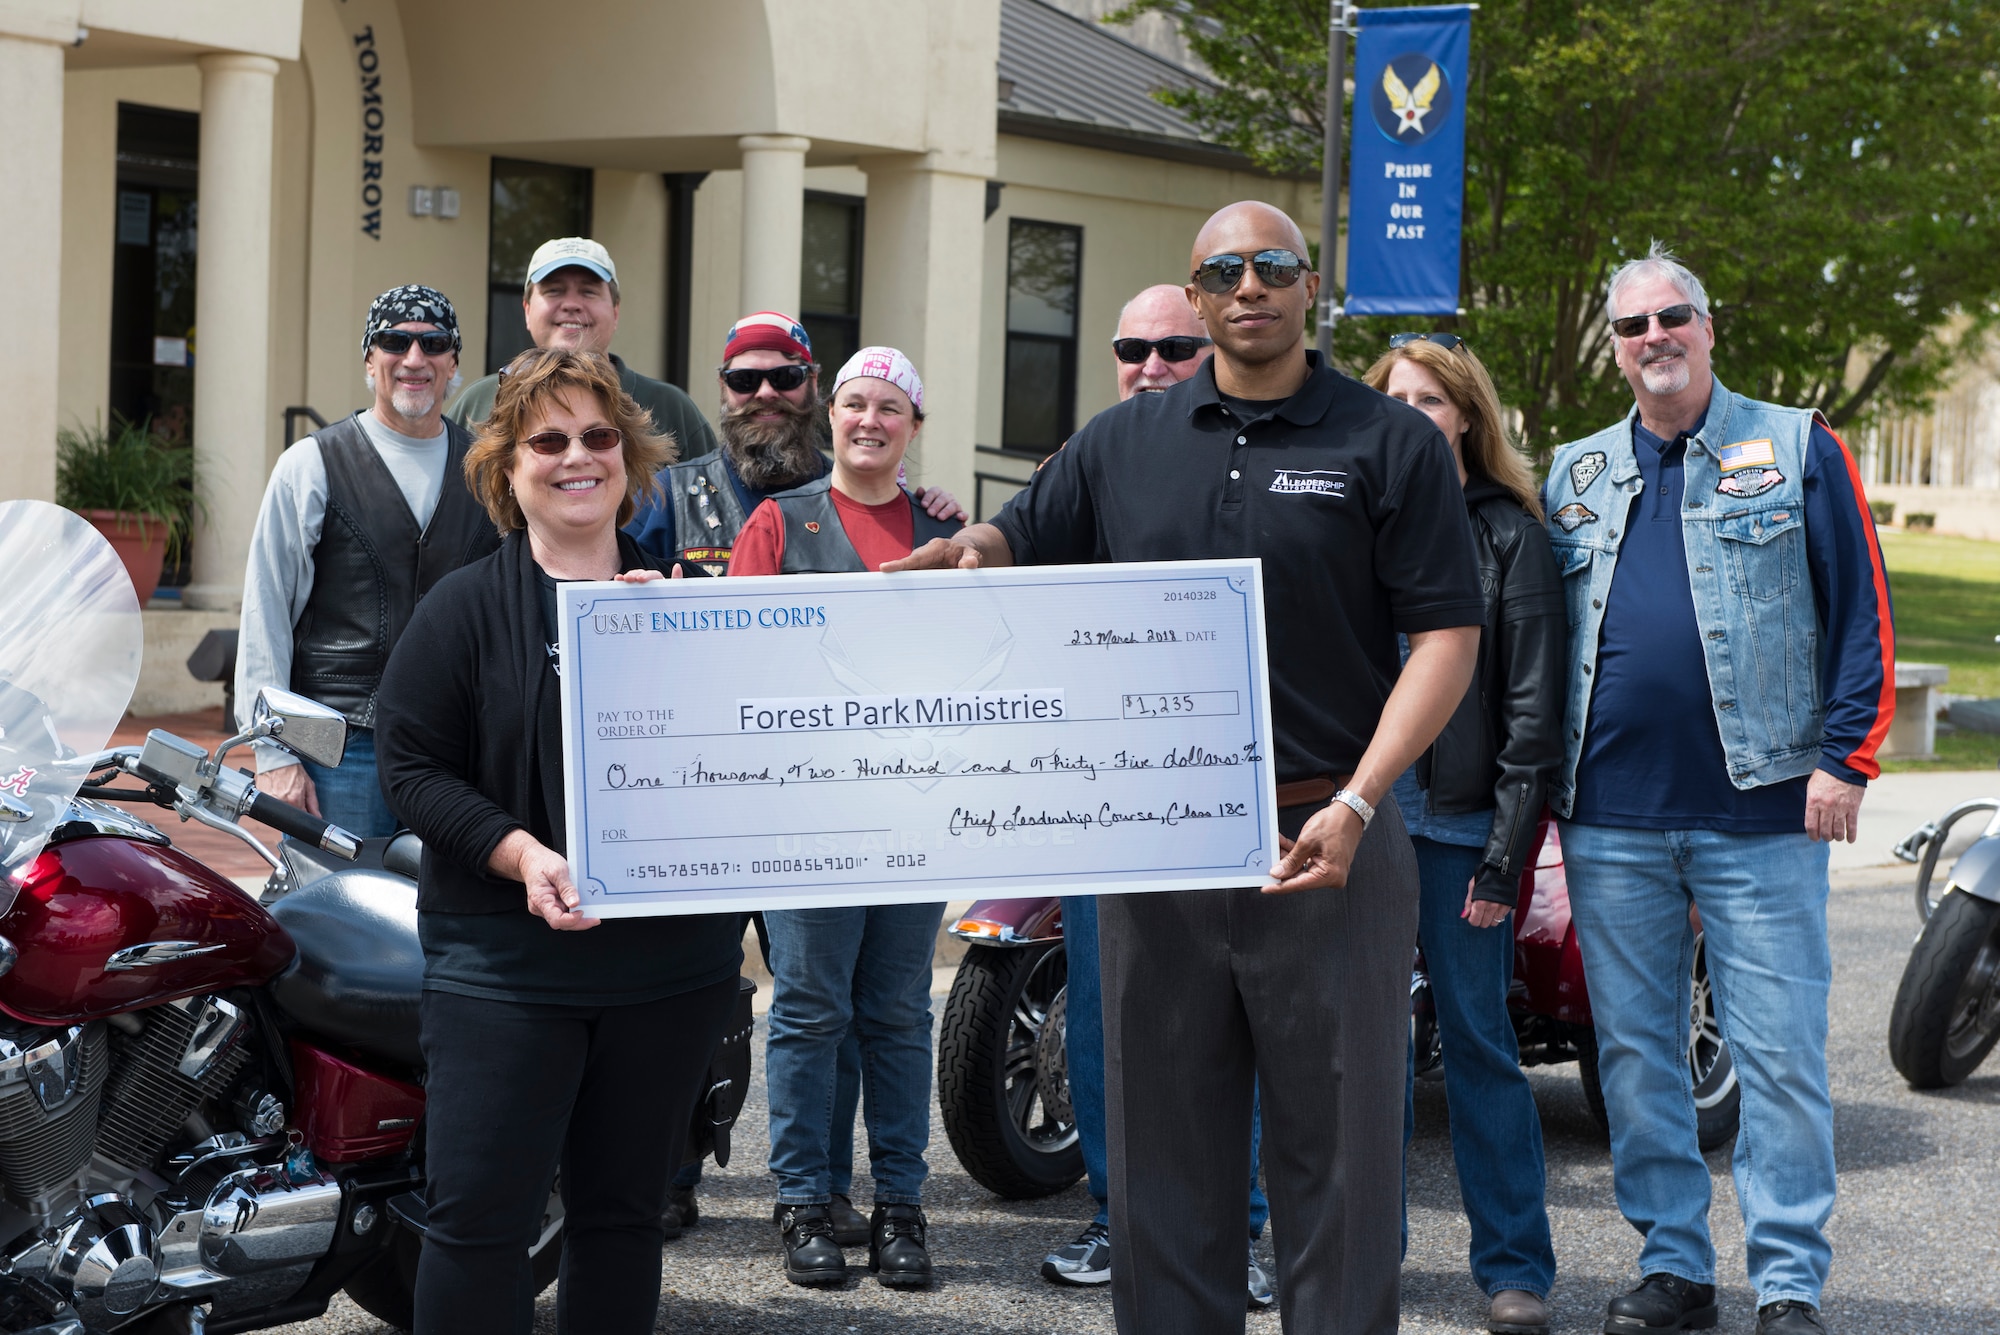 Members of the Air University community donate to local charity